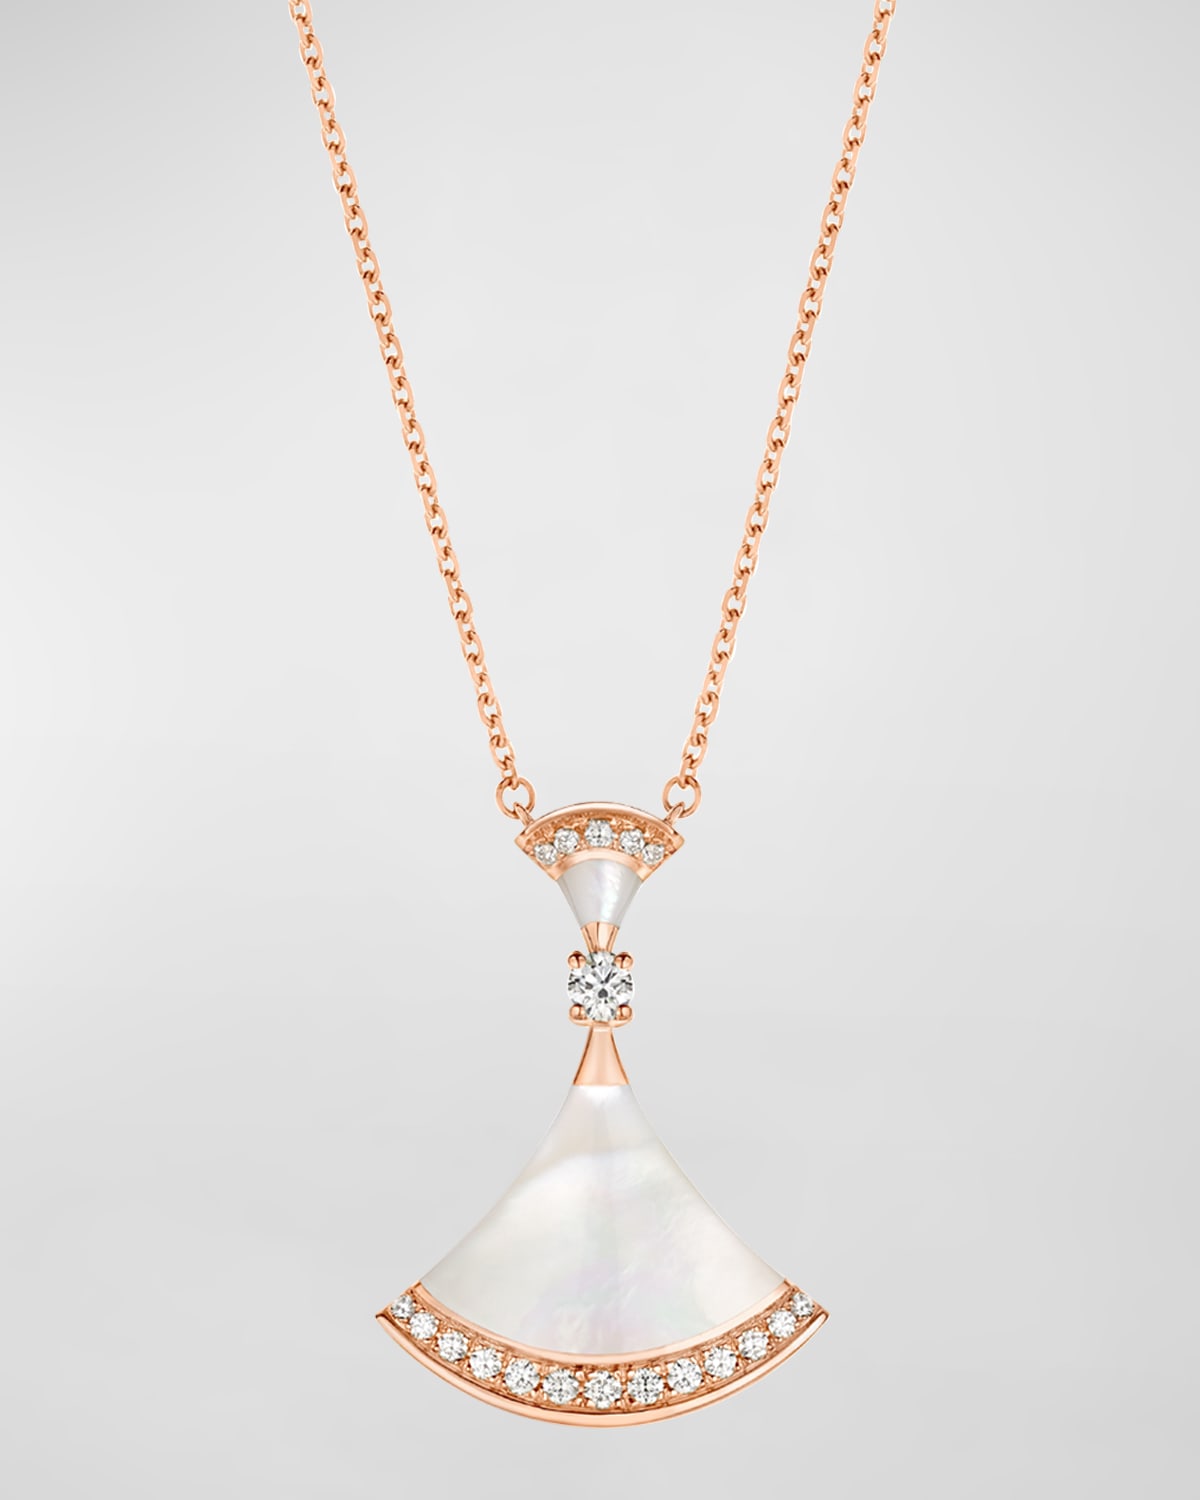 Diva's Dream Pink Gold Mother-of-Pearl Pendant Necklace